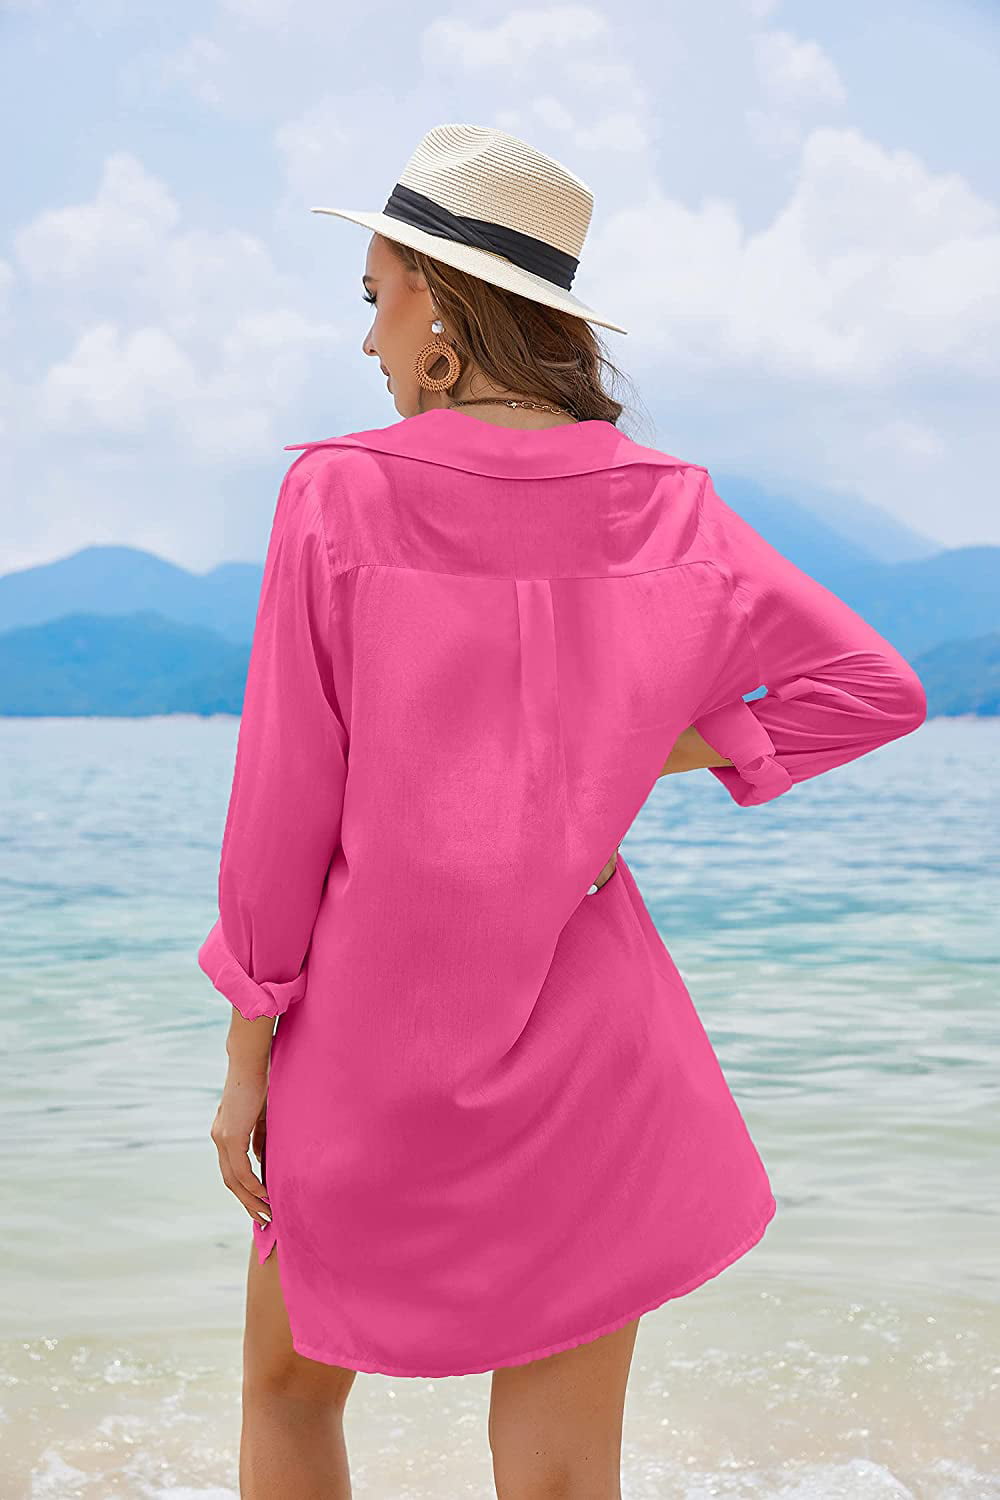 WoMens Beach Cover Up Shirt Button Up Swimsuit Swim Coverups